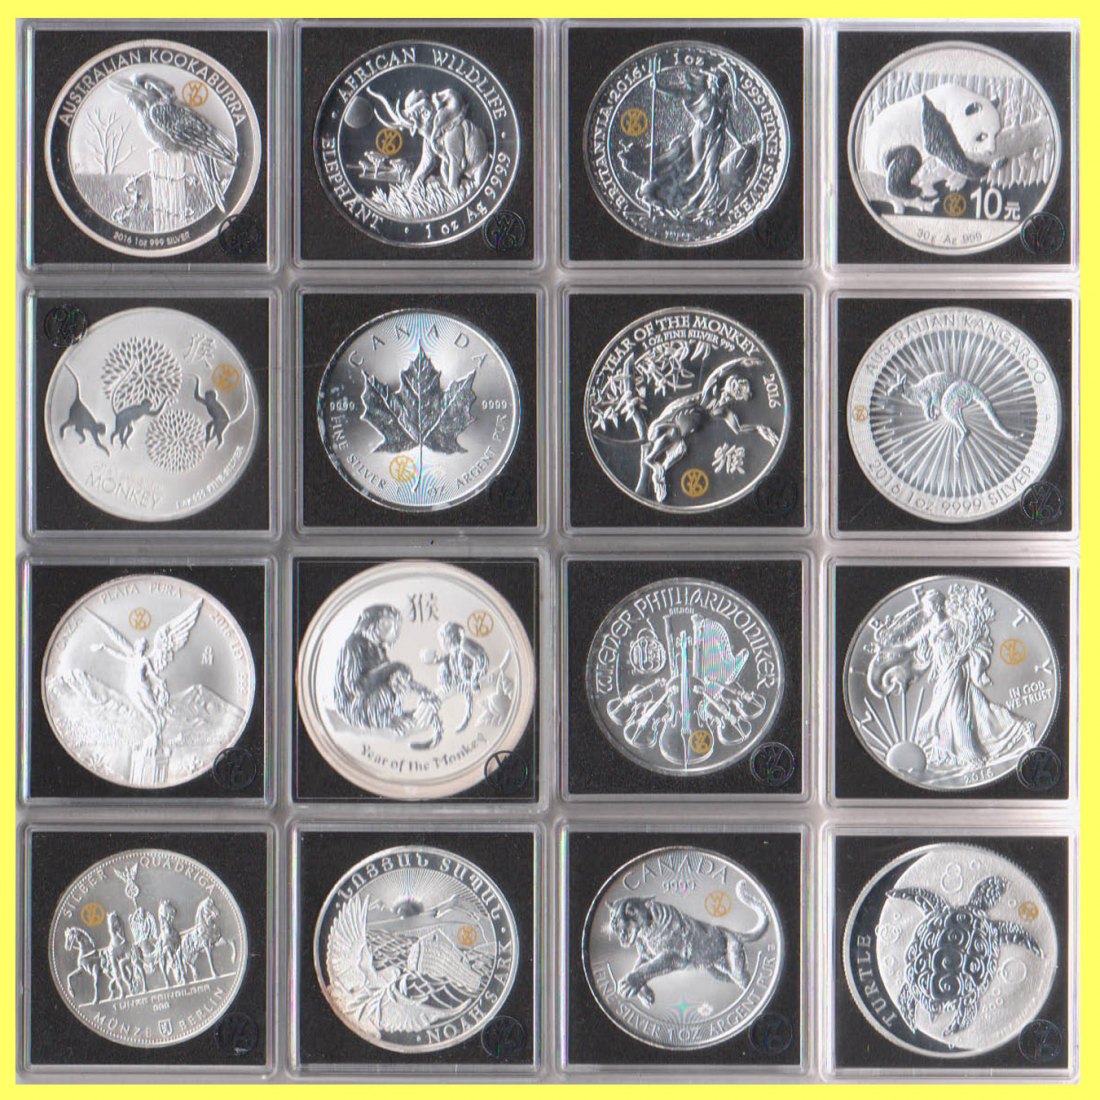  Welt-Box 16x 1oz Silber 24k Privy W16 World Famous Investment Silber Collection* 2016   